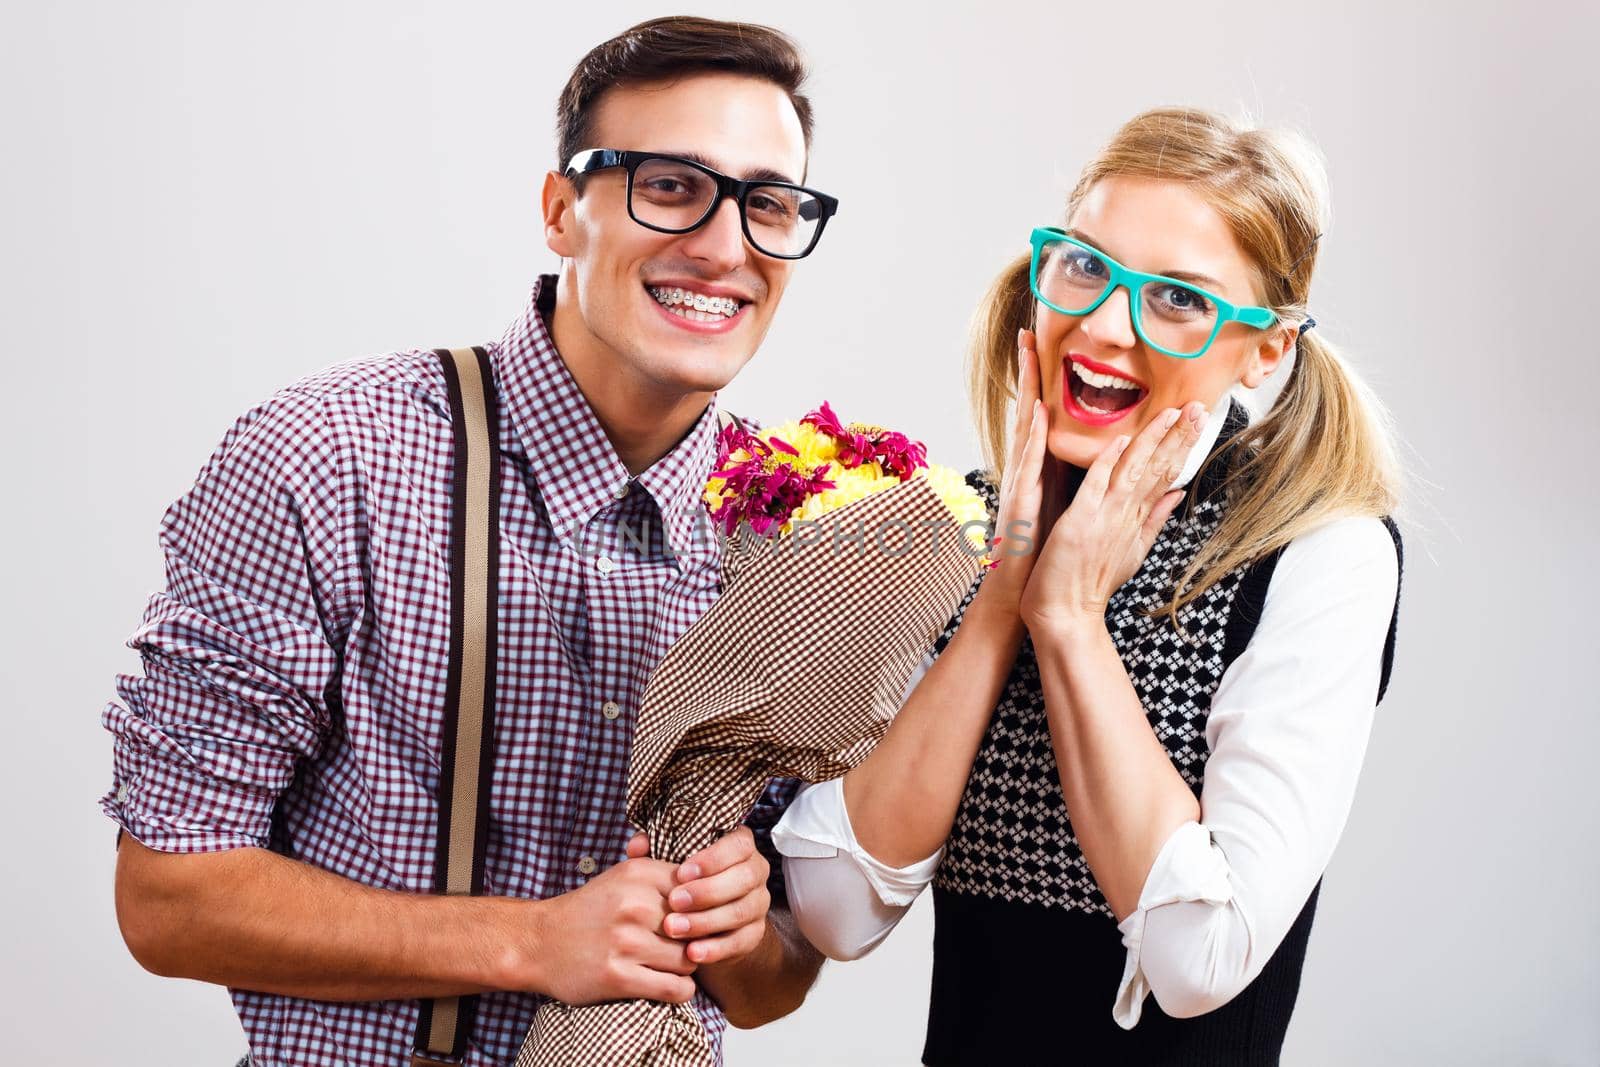 Nerdy man is giving flowers to his nerdy lady.